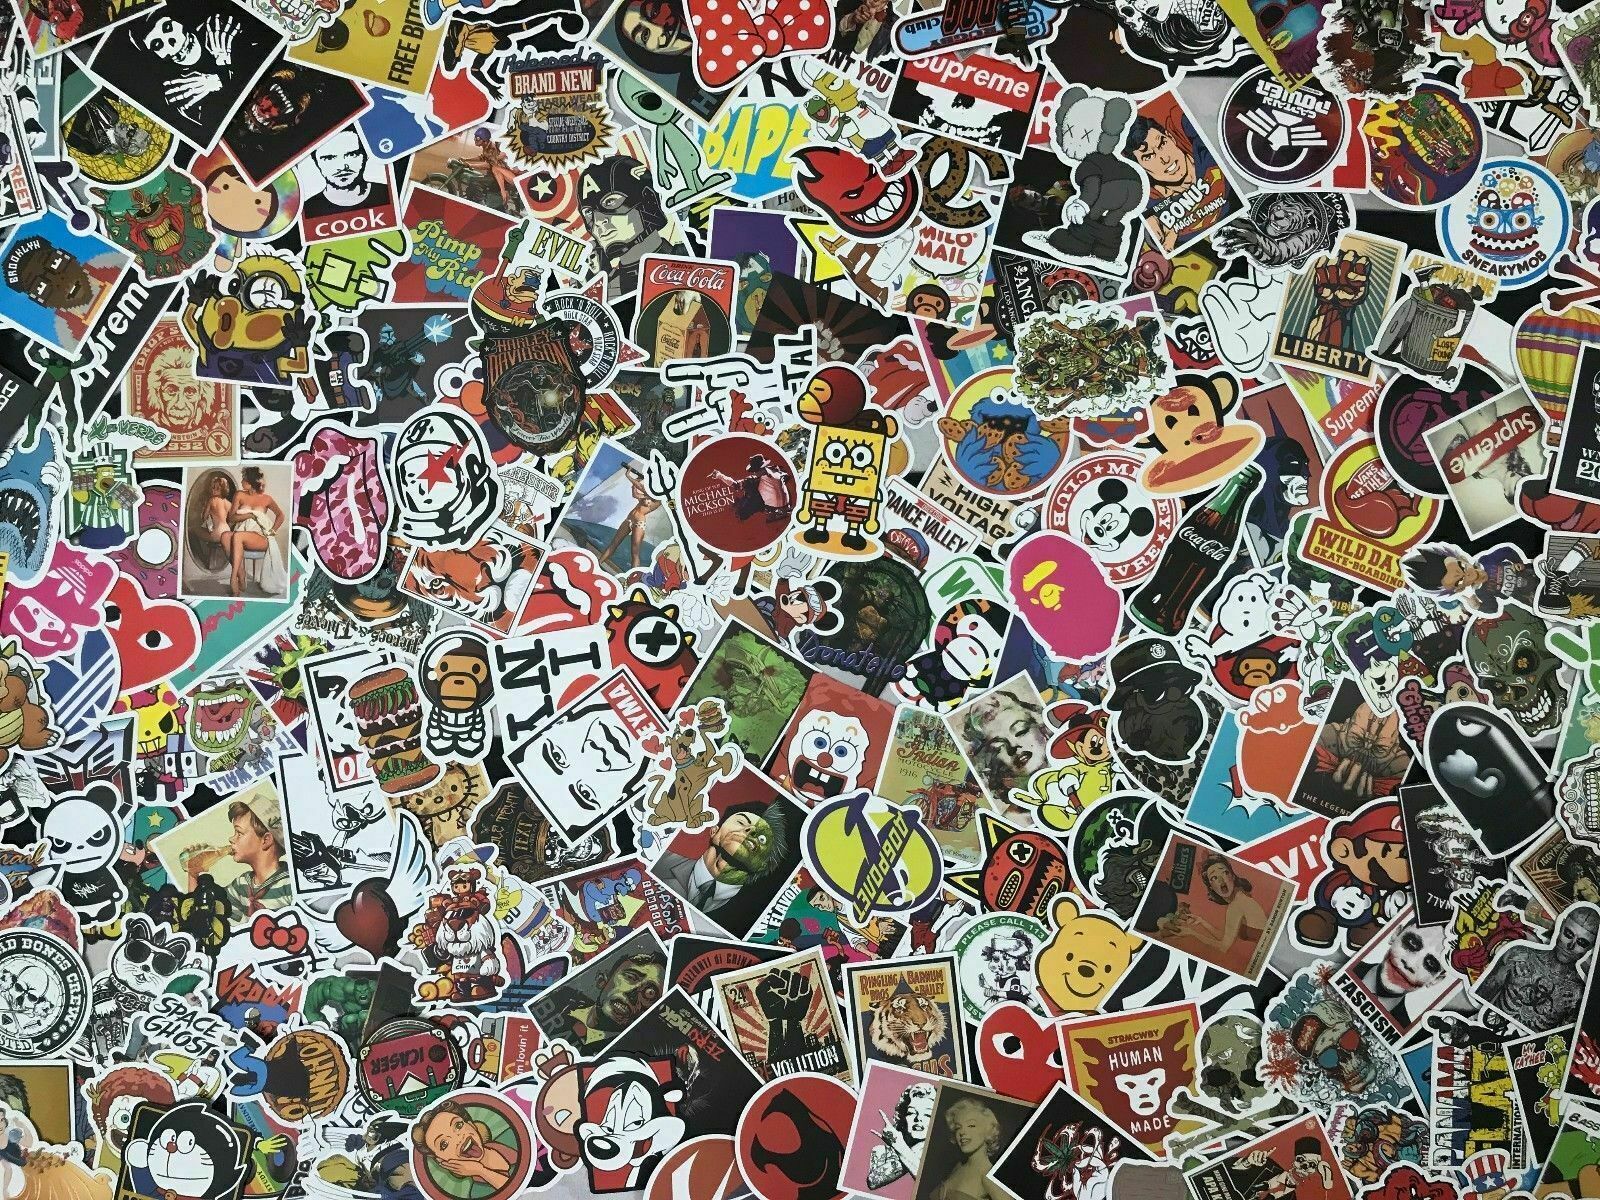 Lot 200 Random Vinyl Laptop Skateboard Stickers bomb Luggage Decals Dope Sticker Unbranded Does Not Apply